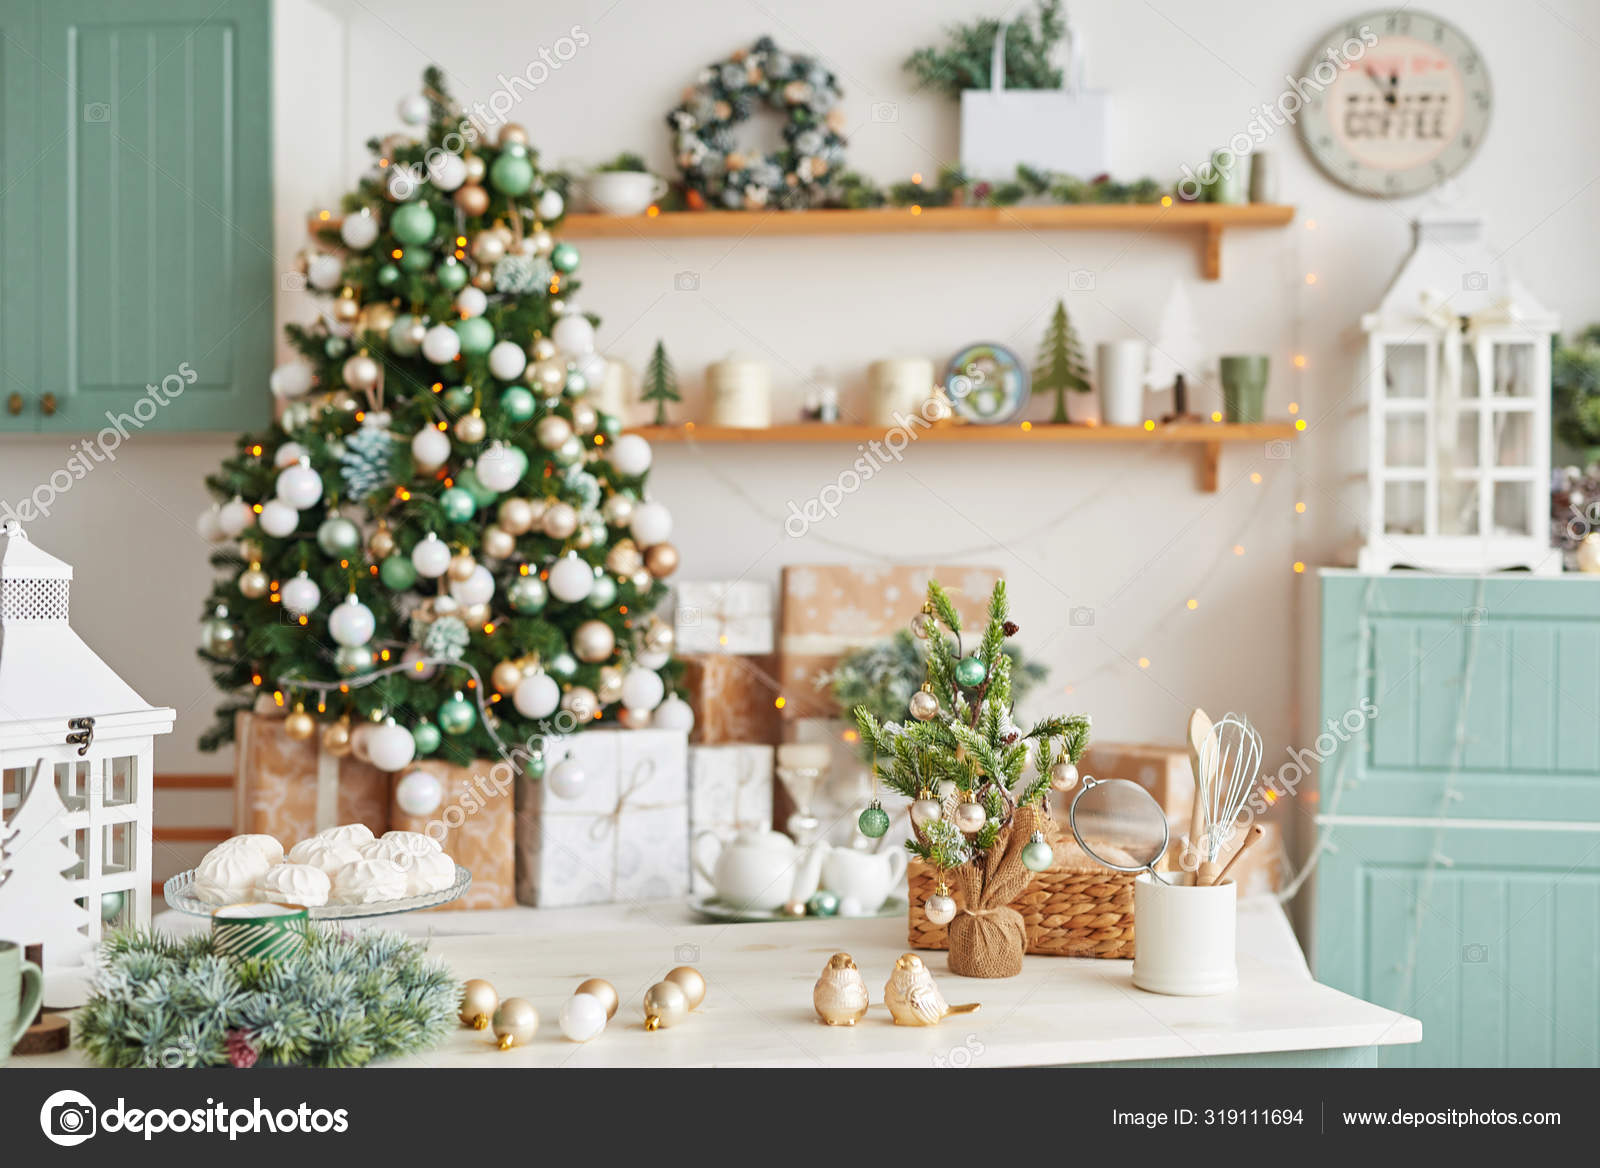 Interior light kitchen with christmas decor and tree. Turquoise-colored  kitchen in classic style. Christmas in the kitchen. Bright kitchen in mint  and white shades with Christmas. Stock Photo by ©yarovoy_aleksandr 319116004